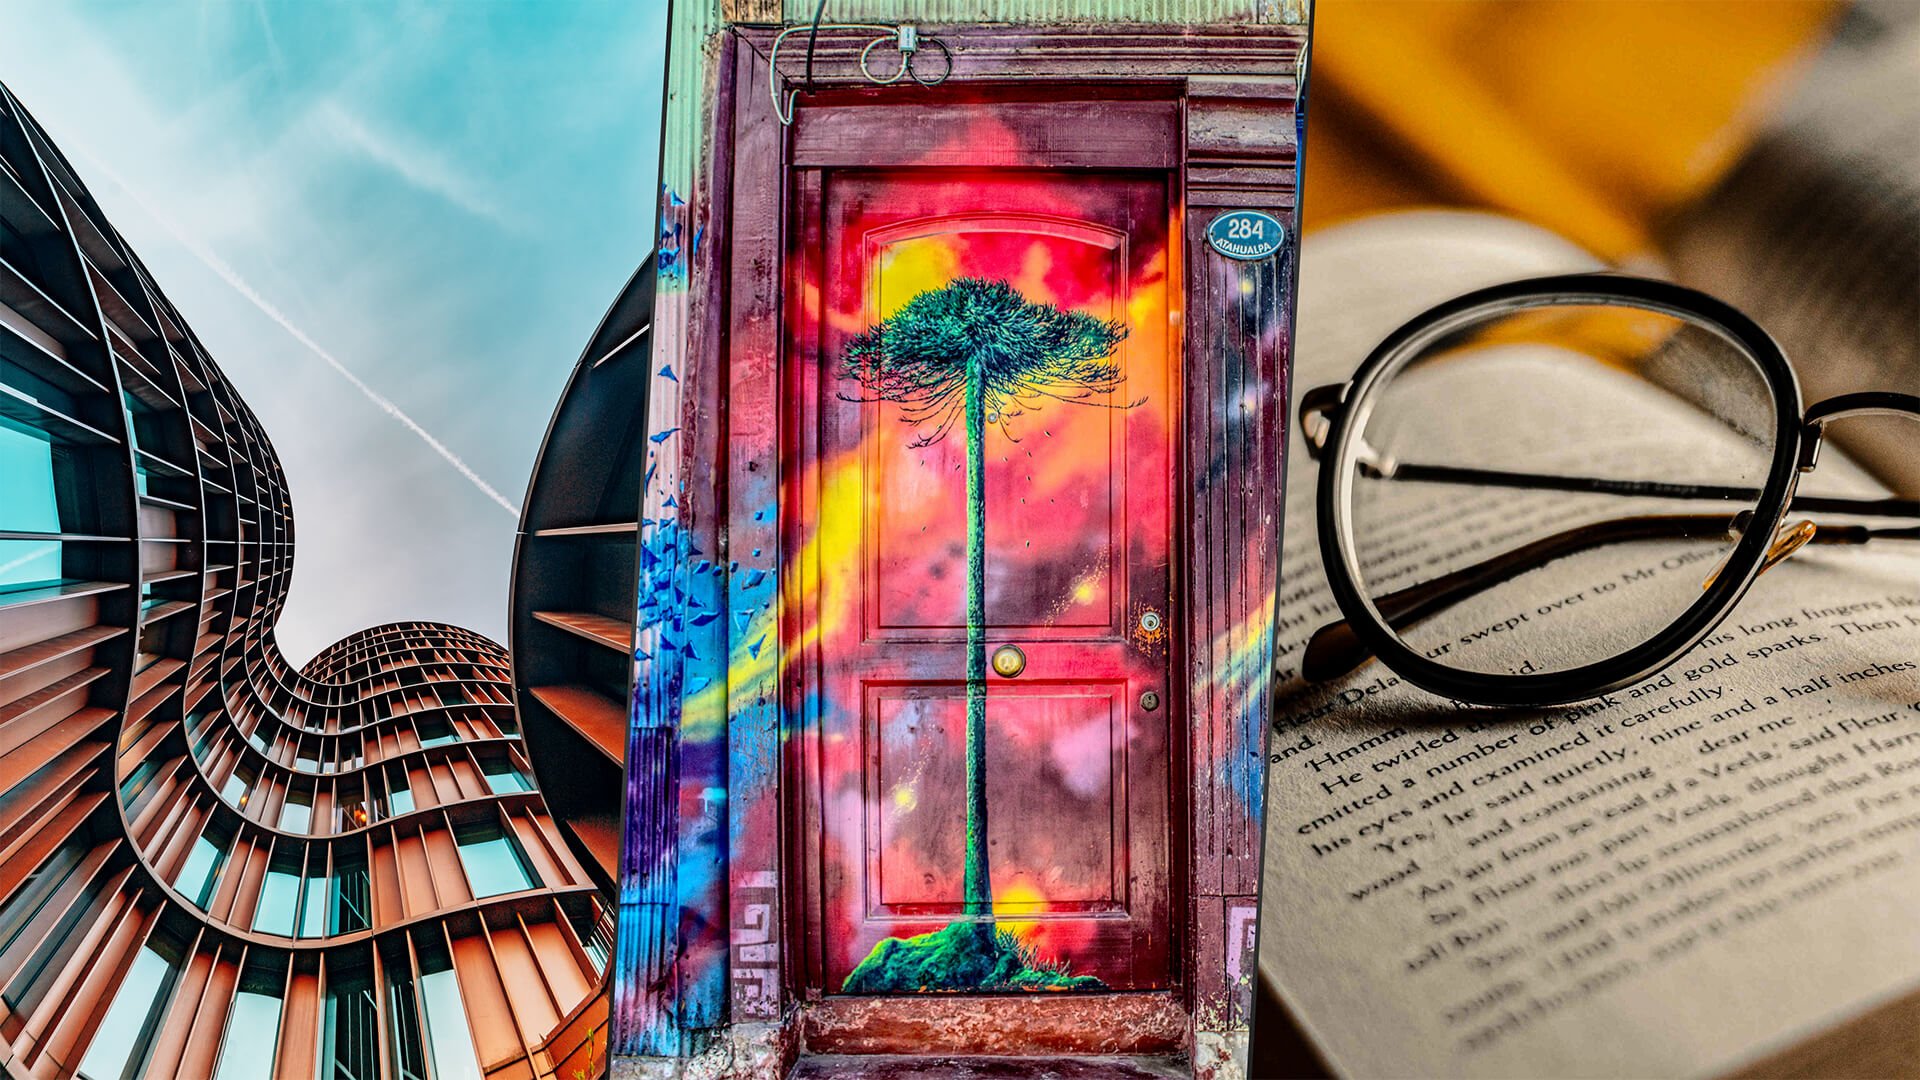 A collage with three images side-to-side showing a a contemporary architecture exterior of a high rise building, an artistic graffiti painted in front of a multicolor psychedelic background on top of a wooden door, and a pair of eyeglasses on top of the pages of an open book, used here as a metaphor that what you produce is either design, art, or knowledge, and you should always produce it with respect to become a masterpiece.